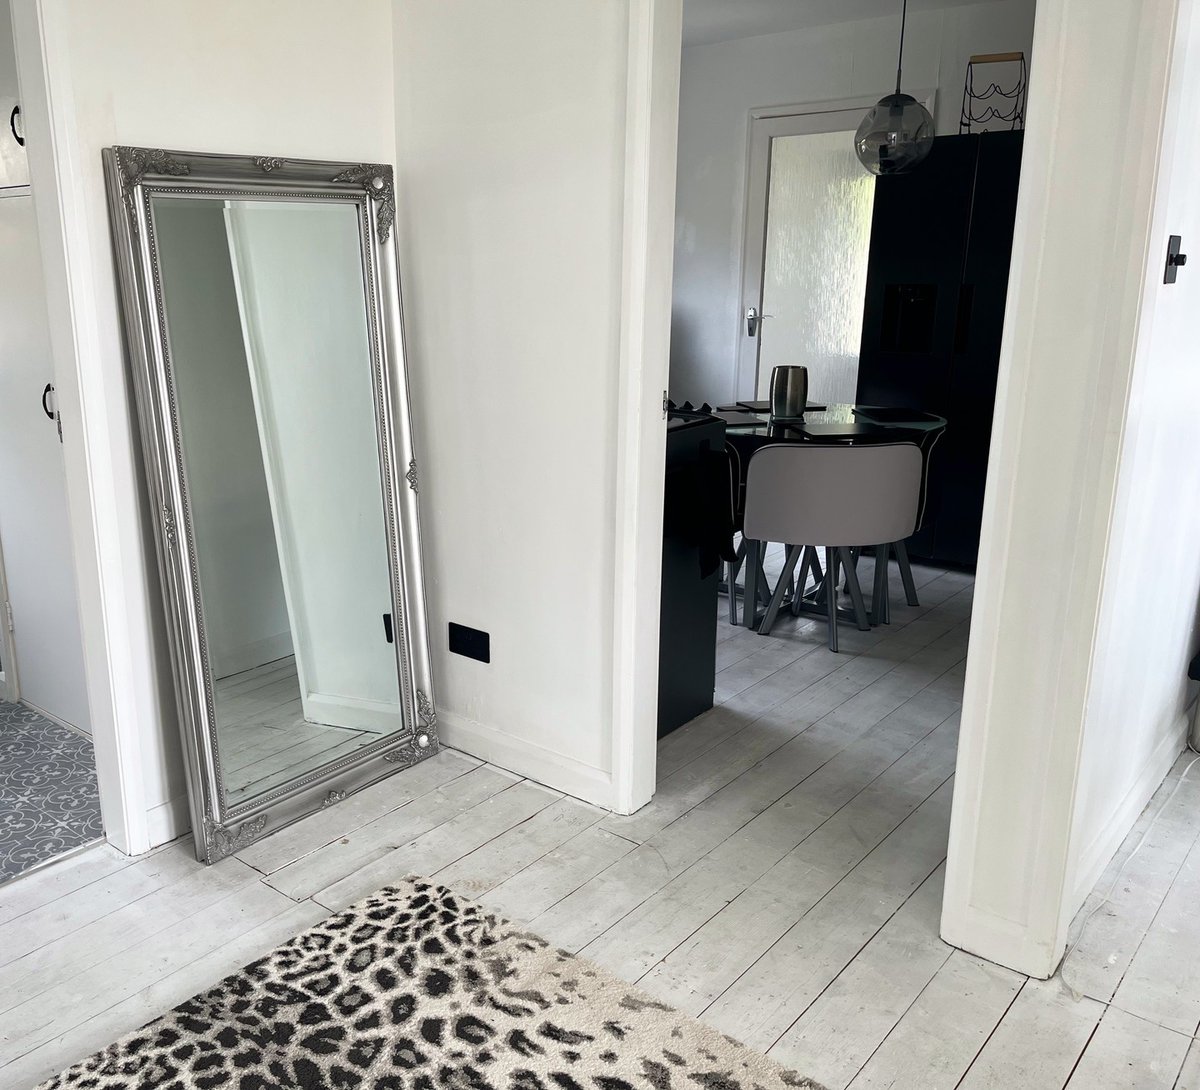 Put your best foot forward with our new full-length mirror! 🇬🇧 Don't worry, it's fixed to the wall! Book now: linktr.ee/craggview #grangeoversands #morecambebay #accommodation #interiordesign #foodies #interiordesigned #detached #awardwinning #floormirror #vrbo #airbnb